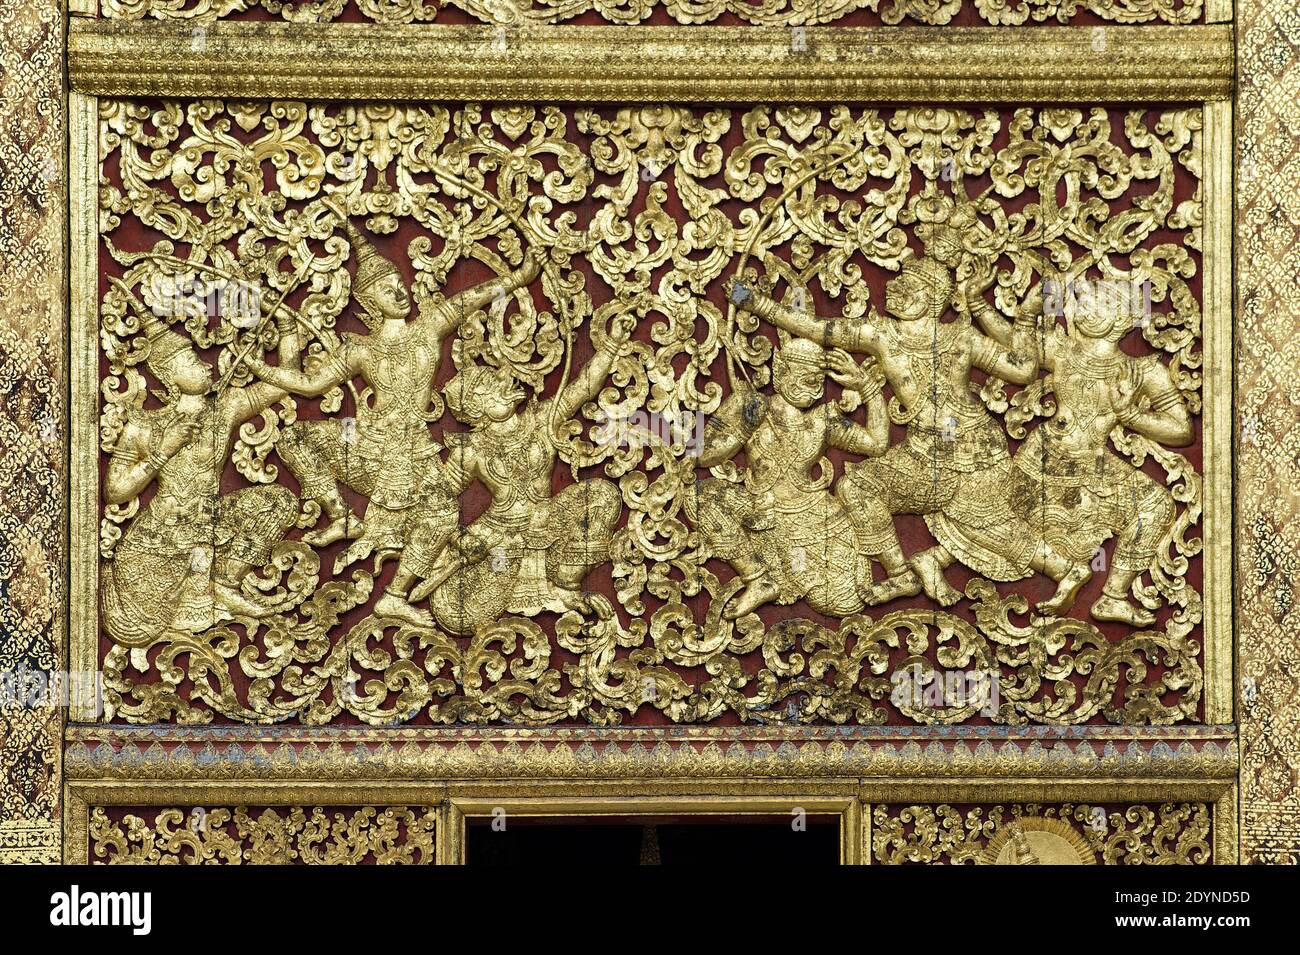 Gilded teak wood panels with rich floral carvings, Royal Funerary Carriage house, Temple Wat Xieng Thong, Luang Prabang, Laos Stock Photo